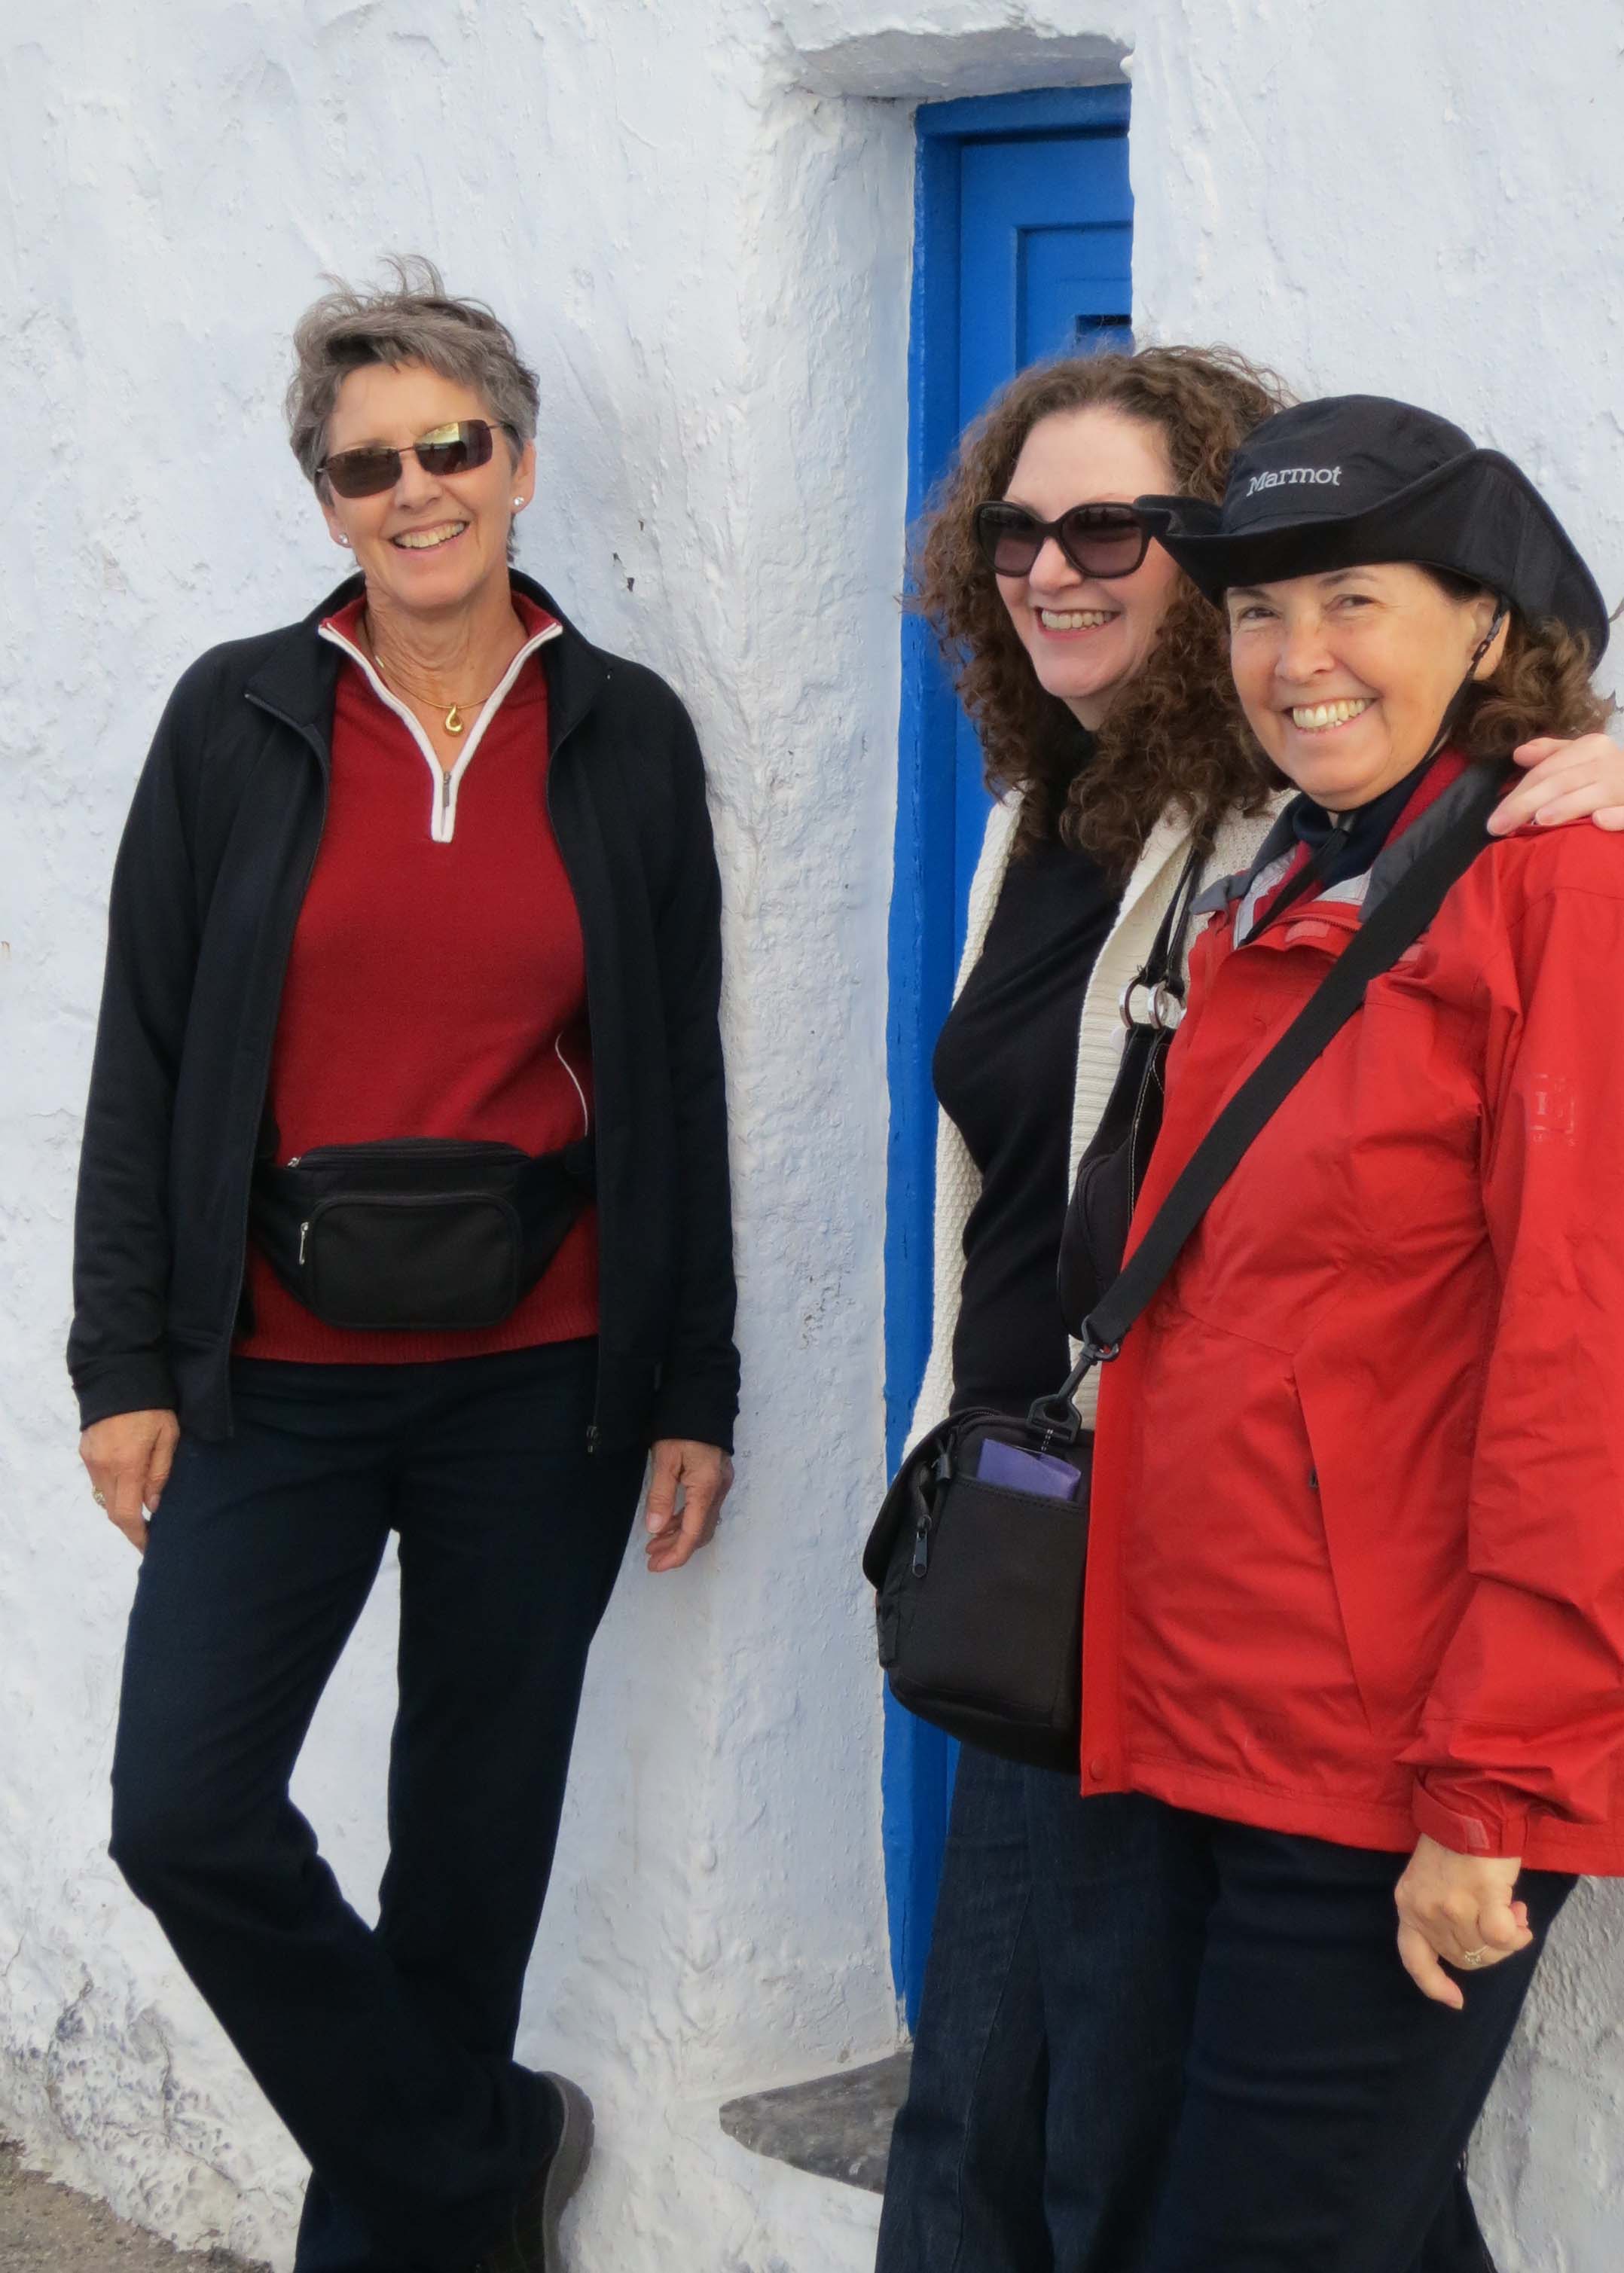 My wife Peggy on the right and two of our traveling companions, Kathi and Frances stand in front of another blue door.